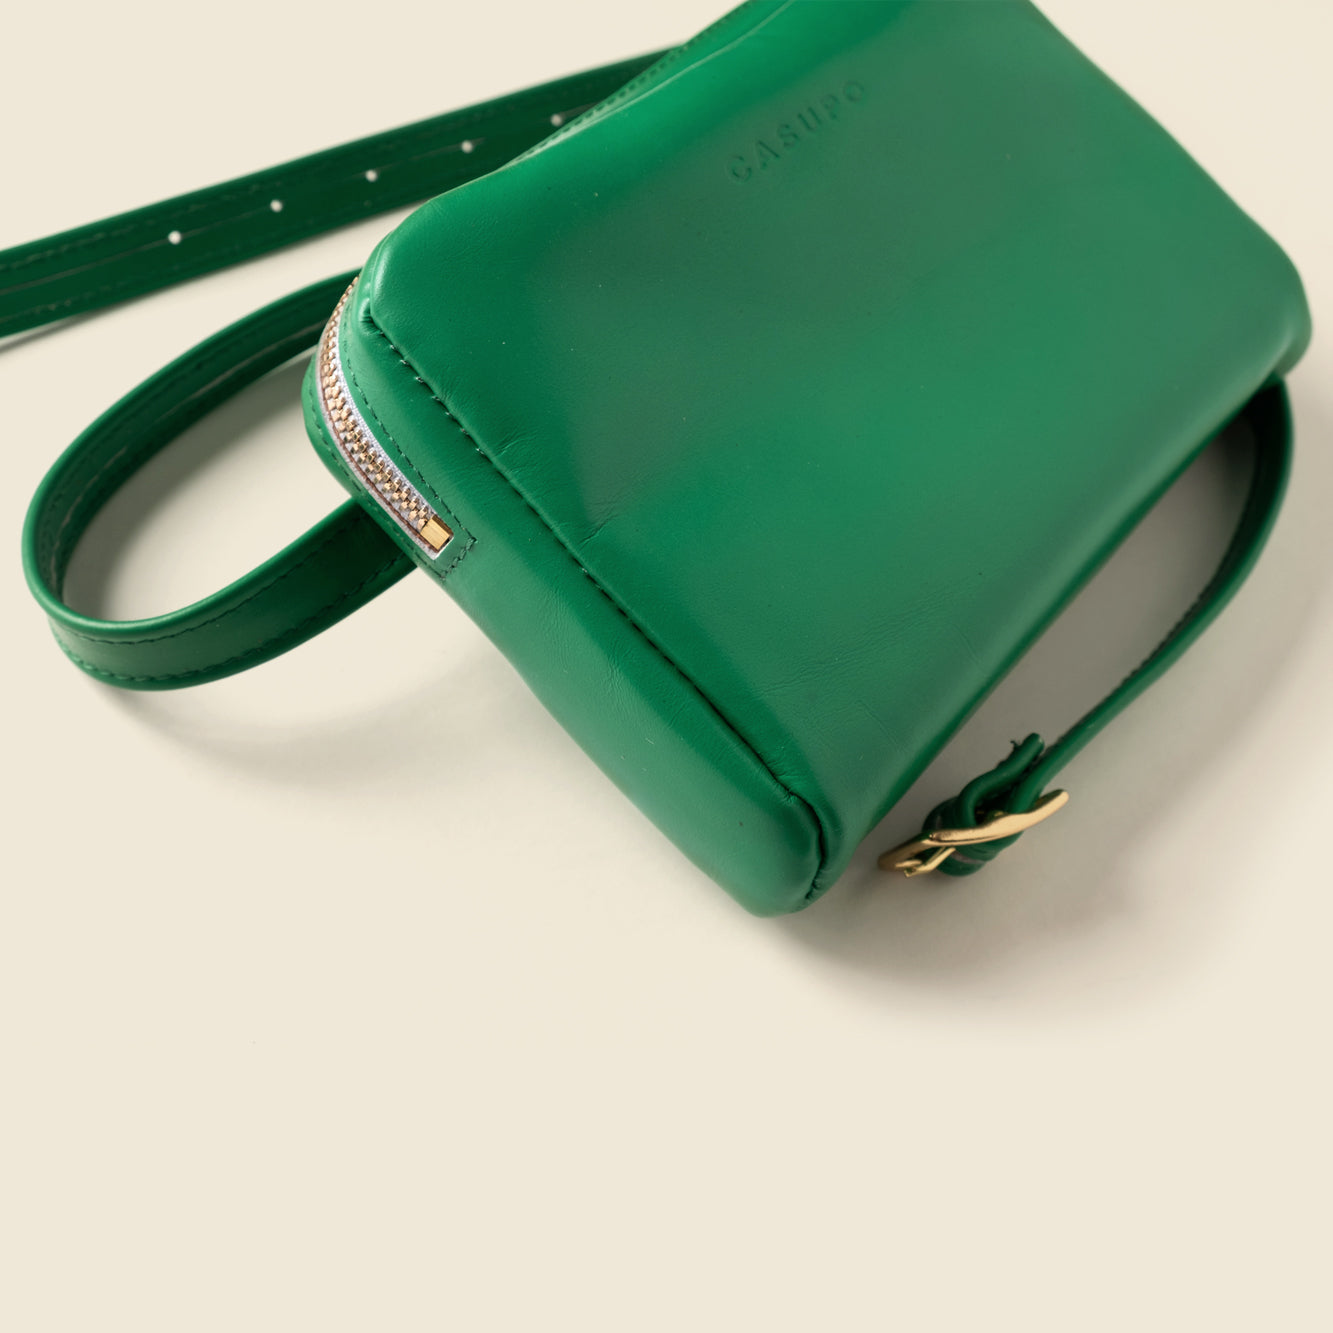 Green leather fanny pack bag for women like clare v and Madewell